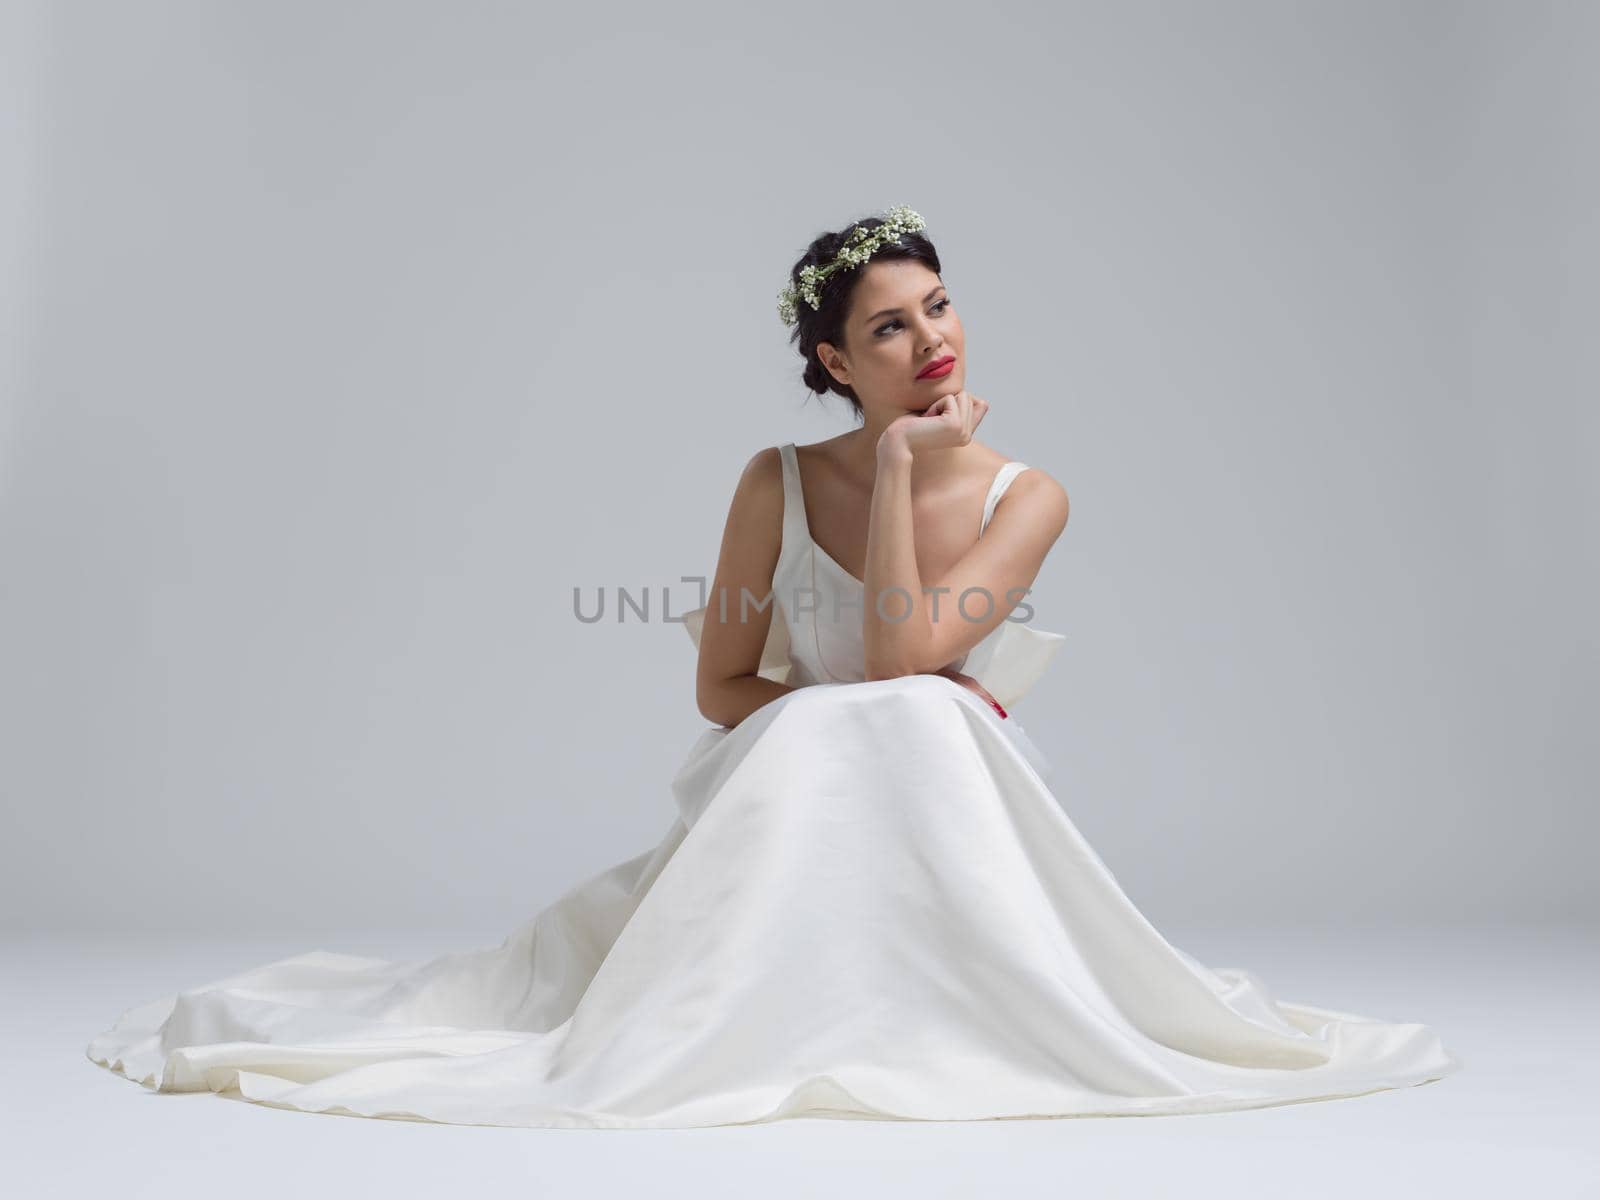 Beautiful young bride sitting in a wedding dress isolated on a white background